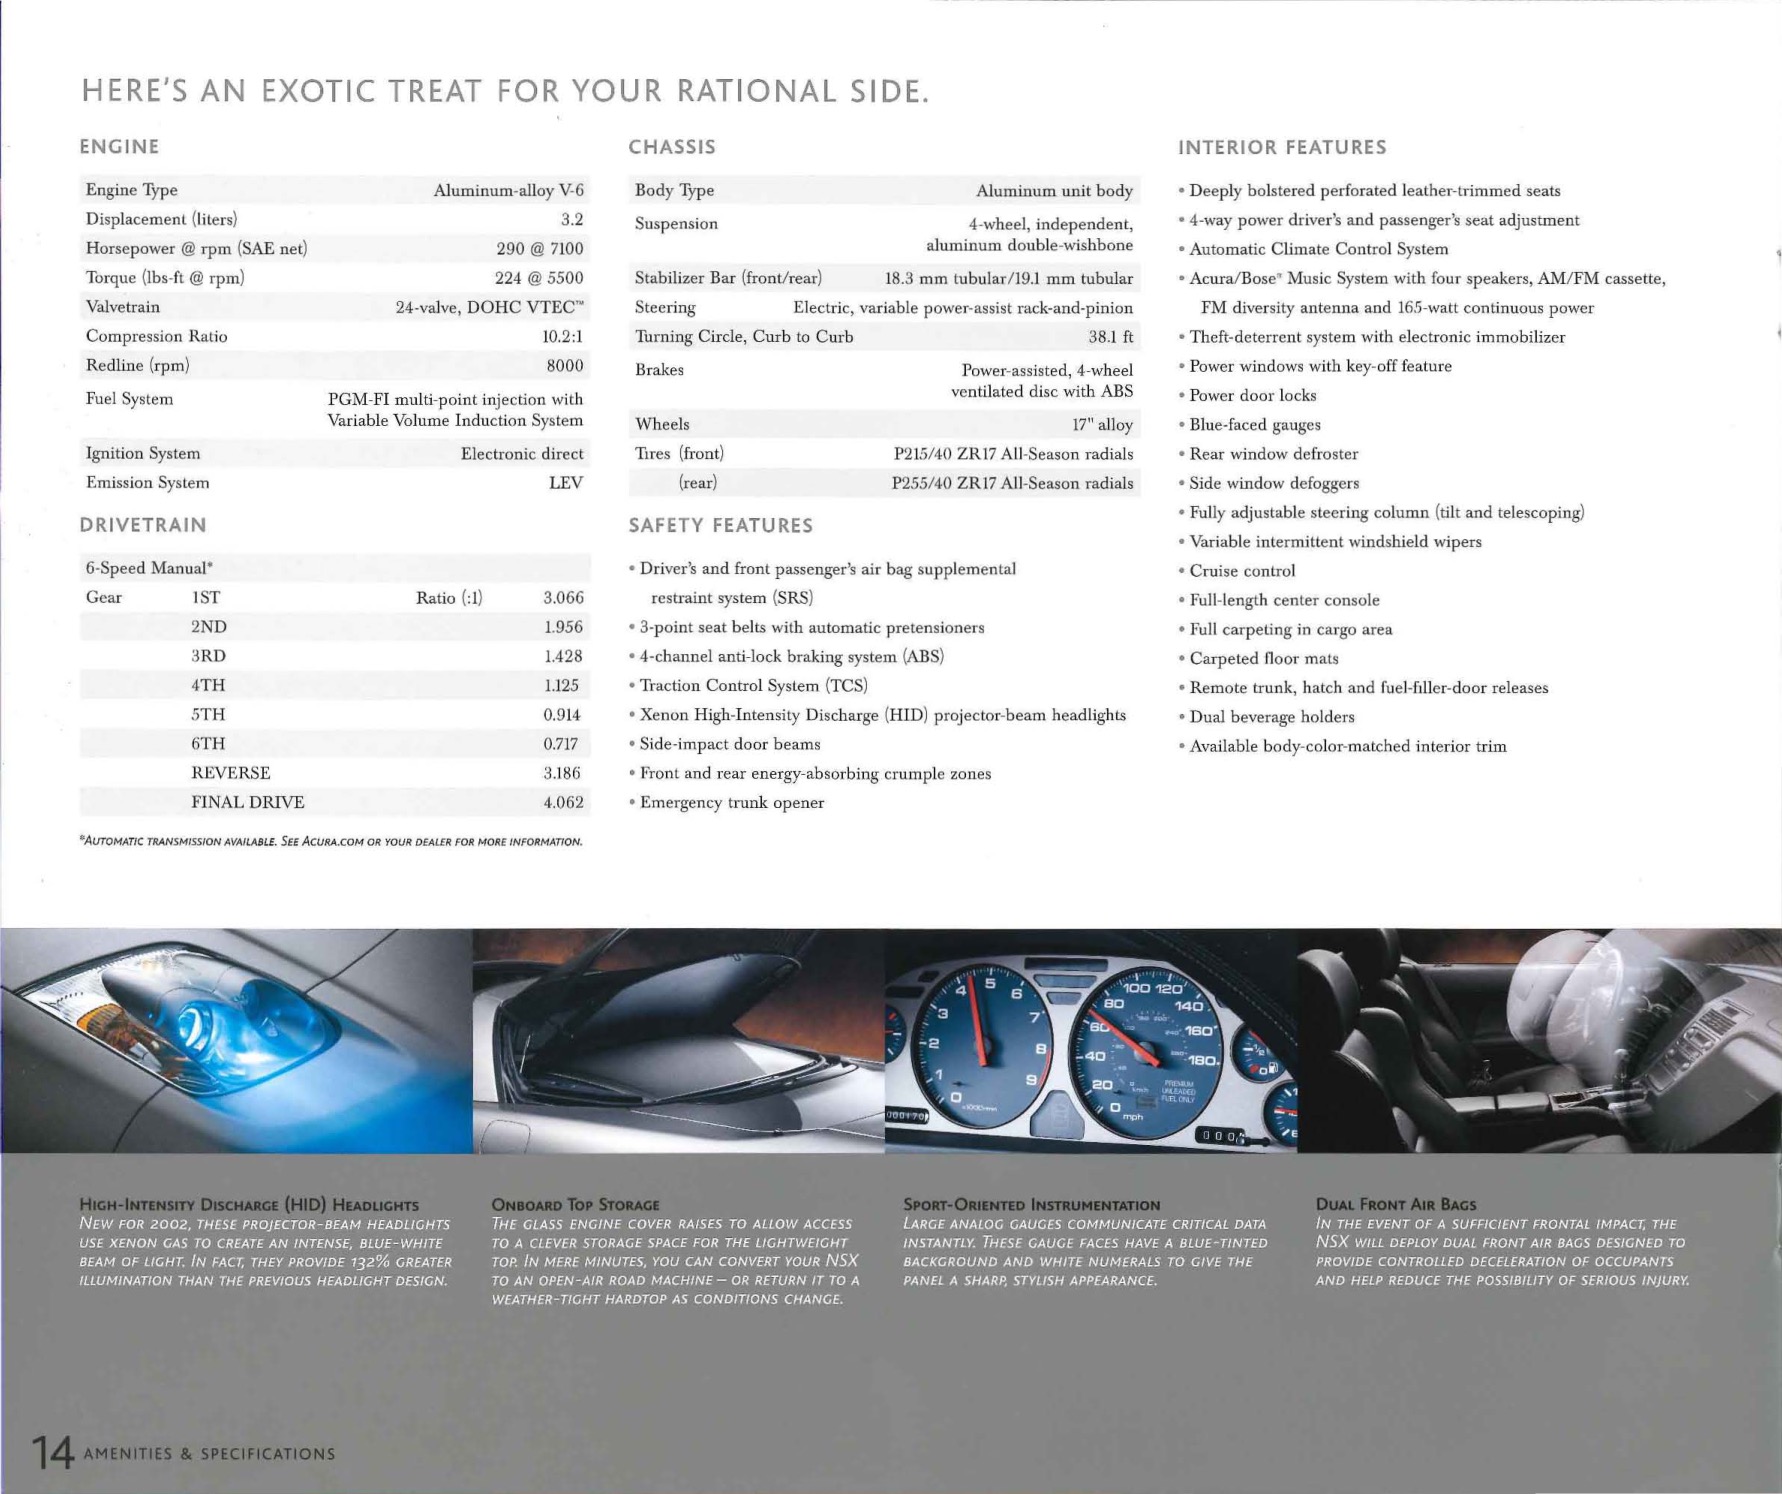 2002 Acura NSX Brochure Page 9